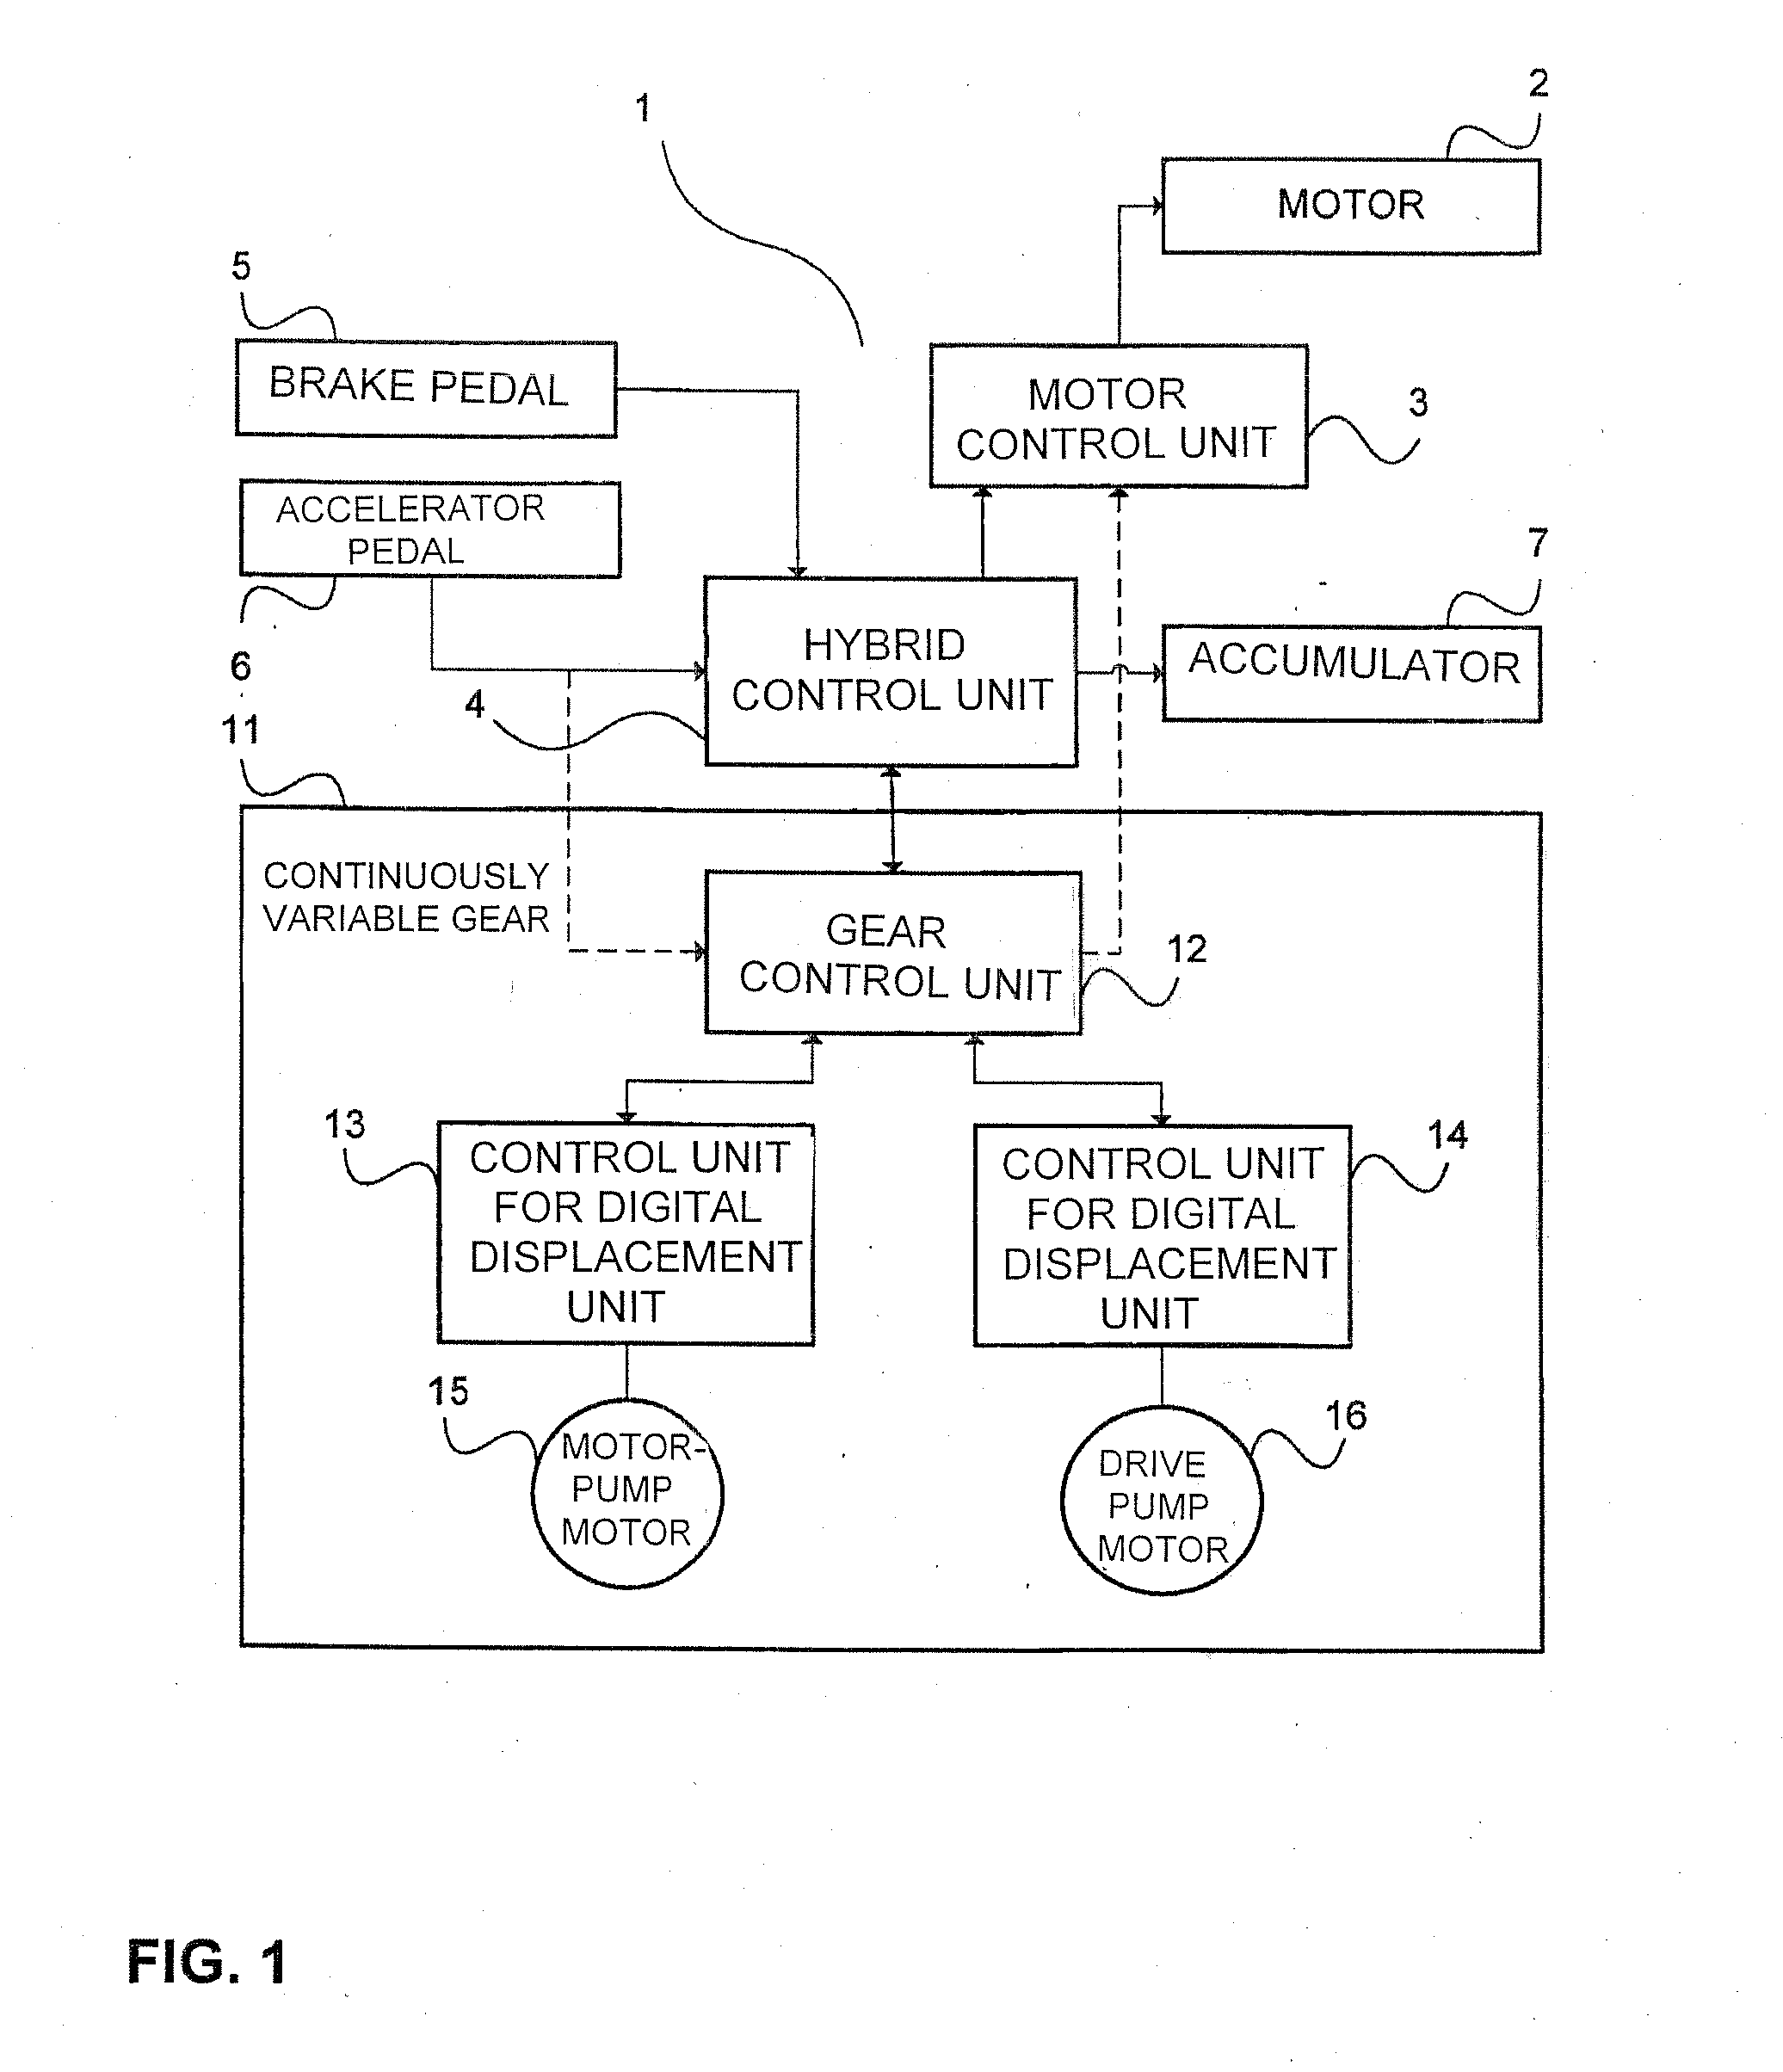 Diagnosis management system and diagnosis management method for a valve-controlled hydrostatic displacement unit